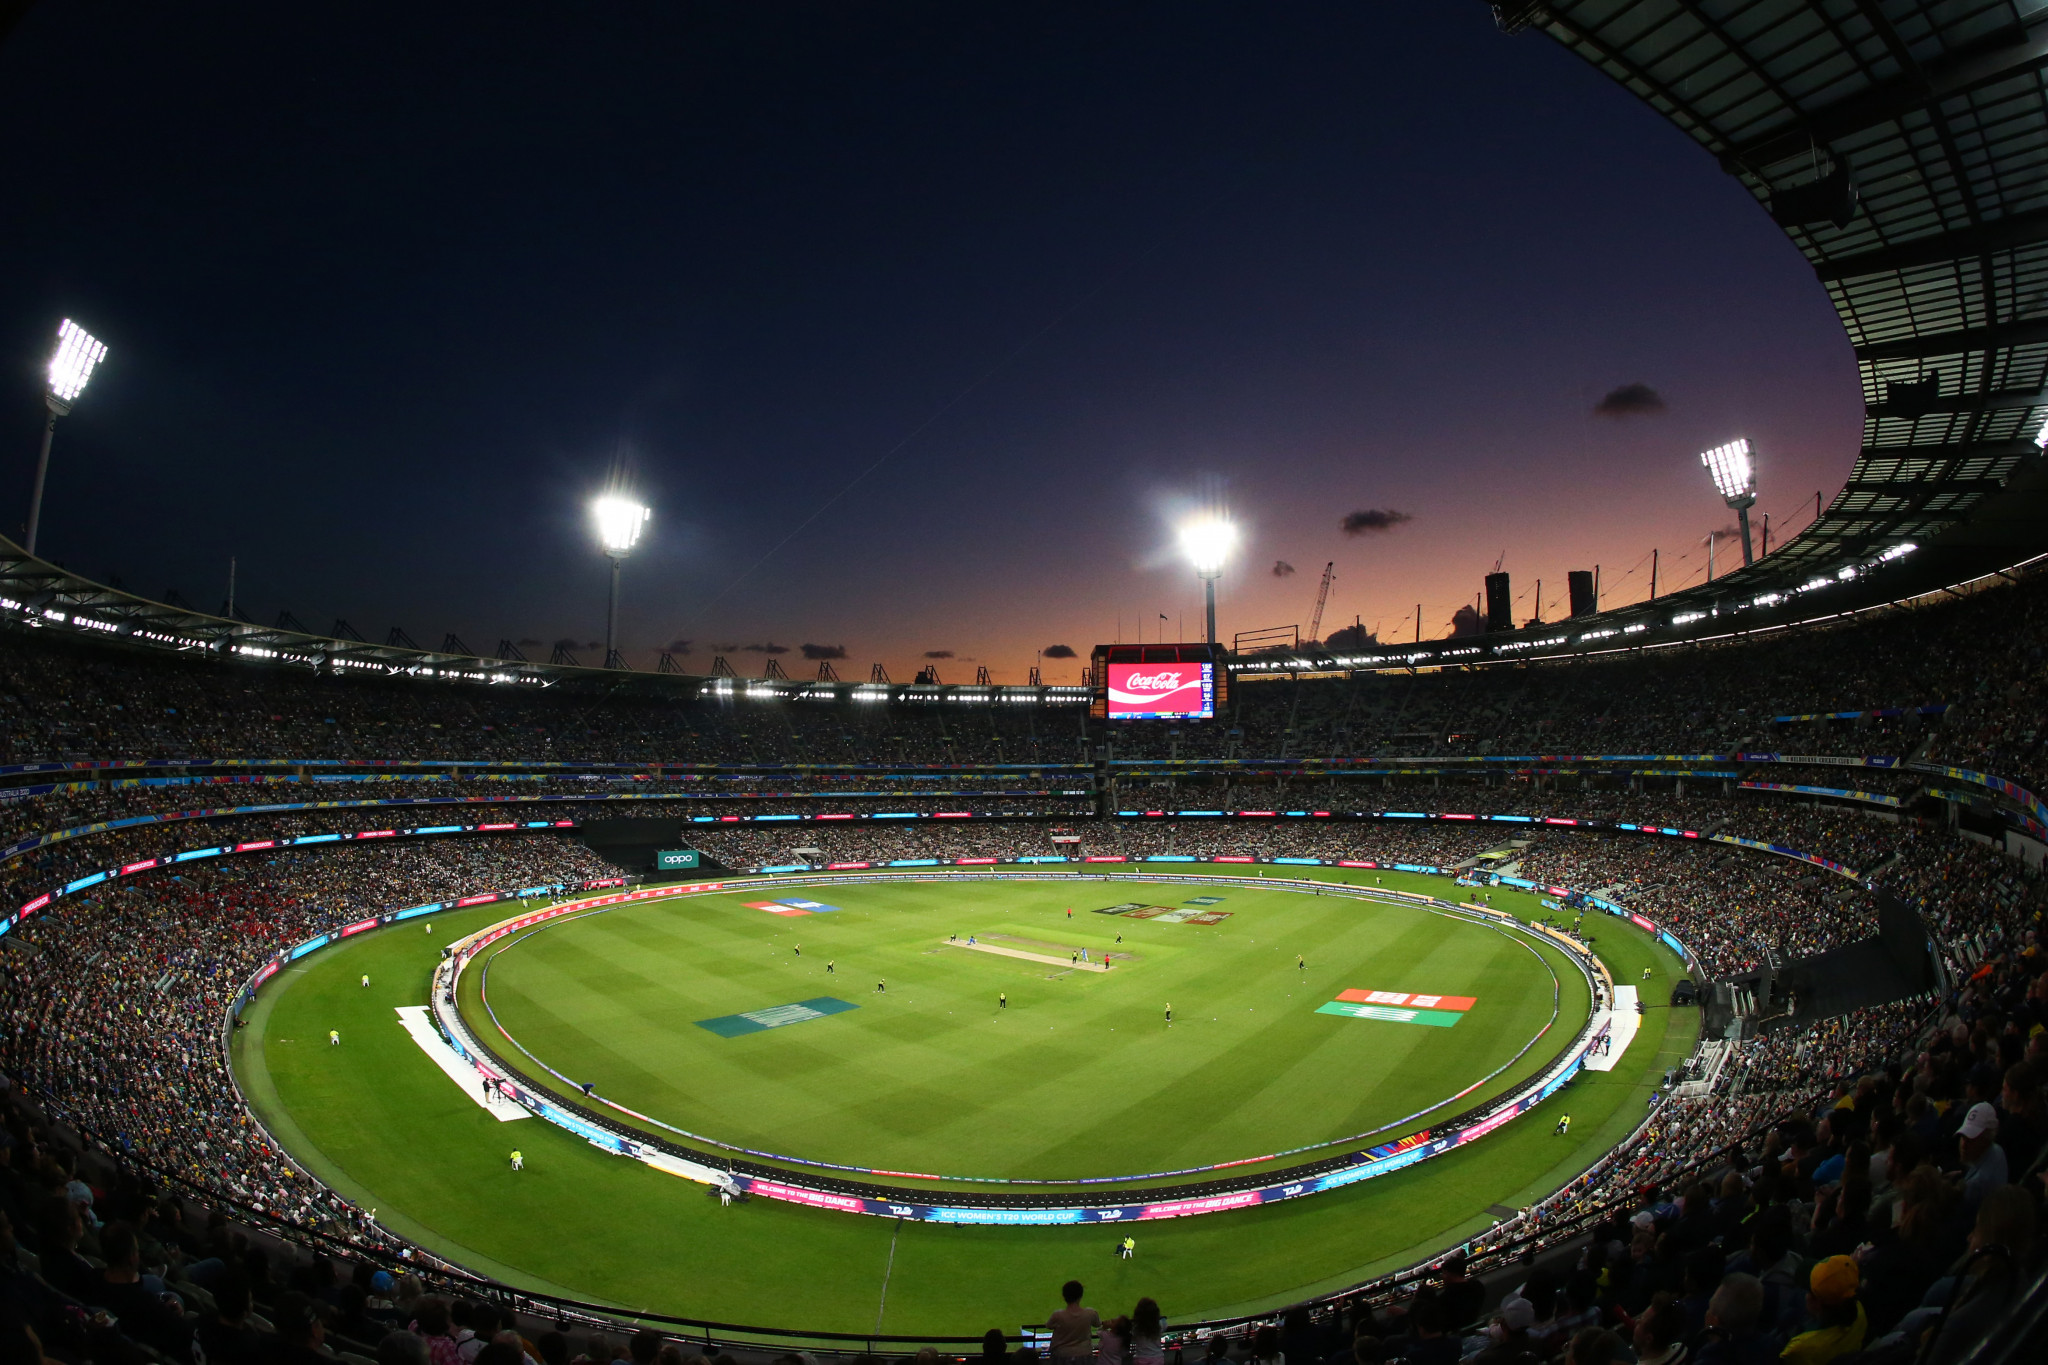 Australia has already proven to be highly successful in organising women's sport events, attracting 86,000 fans to the Women's T20 World Cup final ©Getty Images